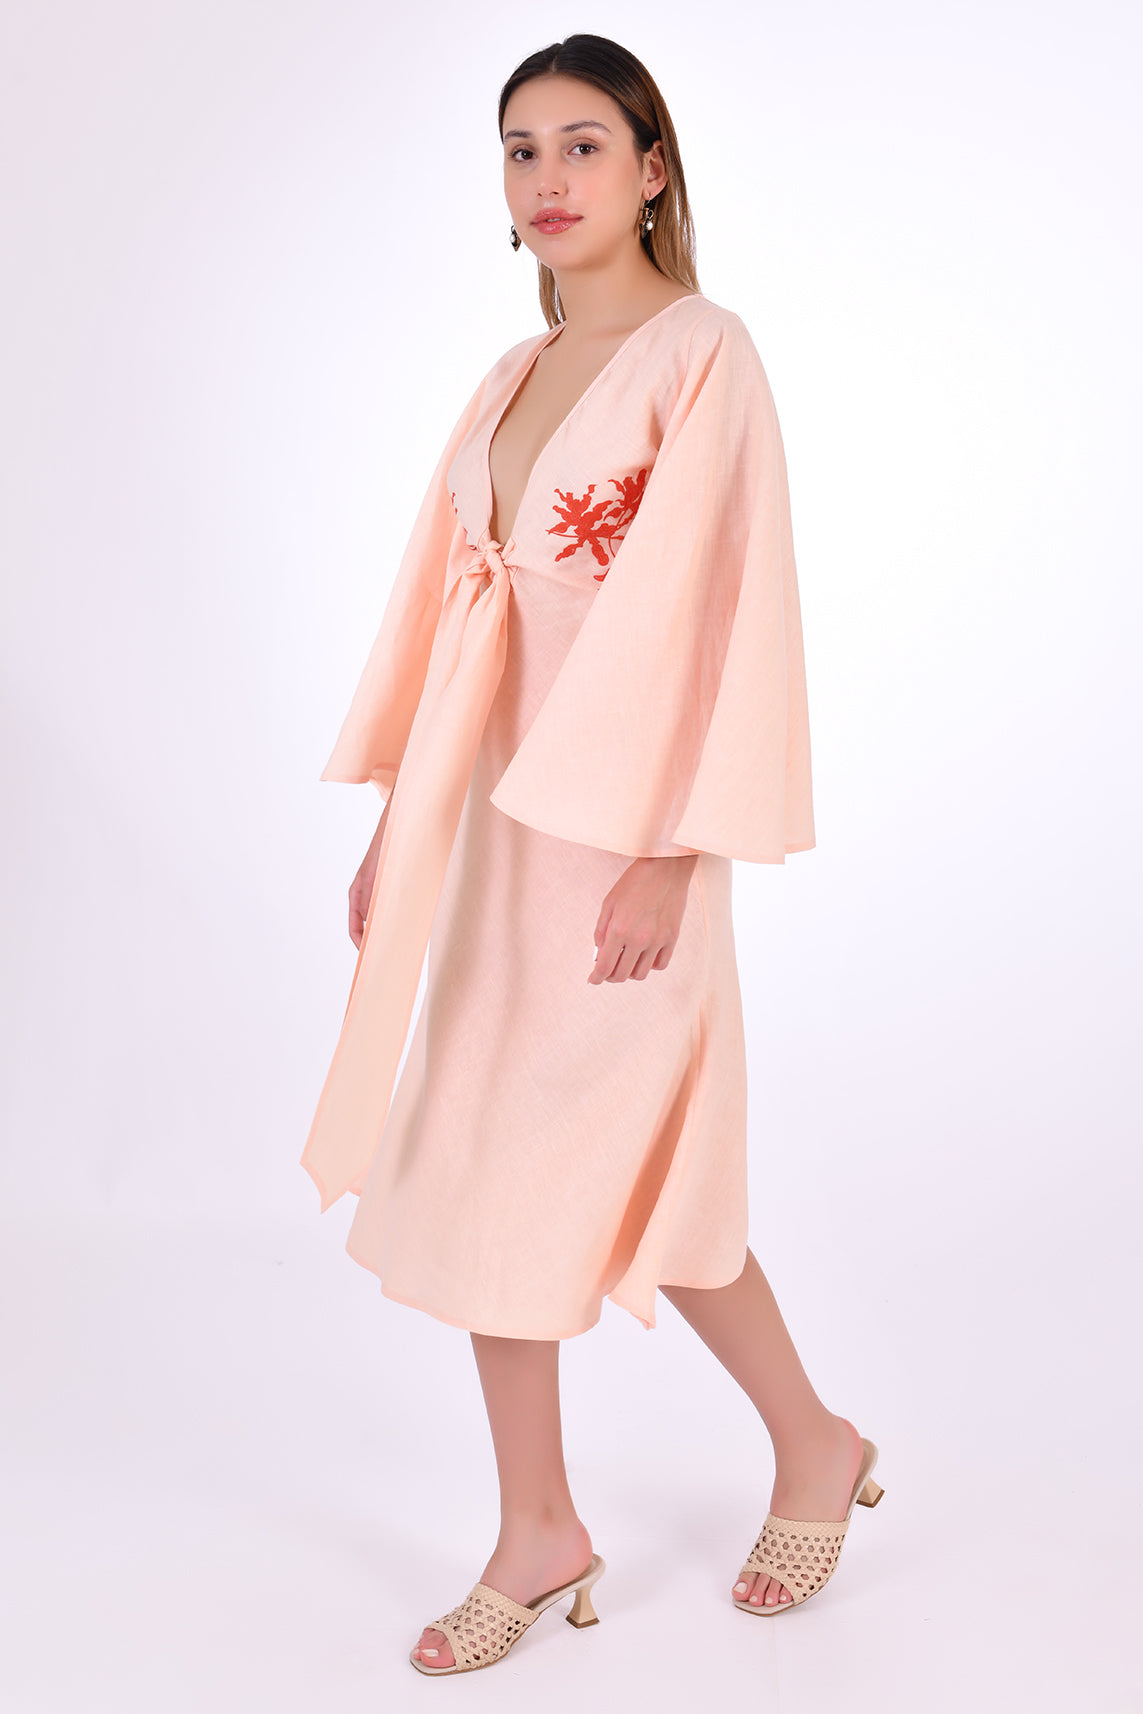 Fanm Mon Dayna Linen Dress Side View. Showcasing Kimono Sleeve, Embroidery detail, Plunging Neckline with Tie Front, and length.